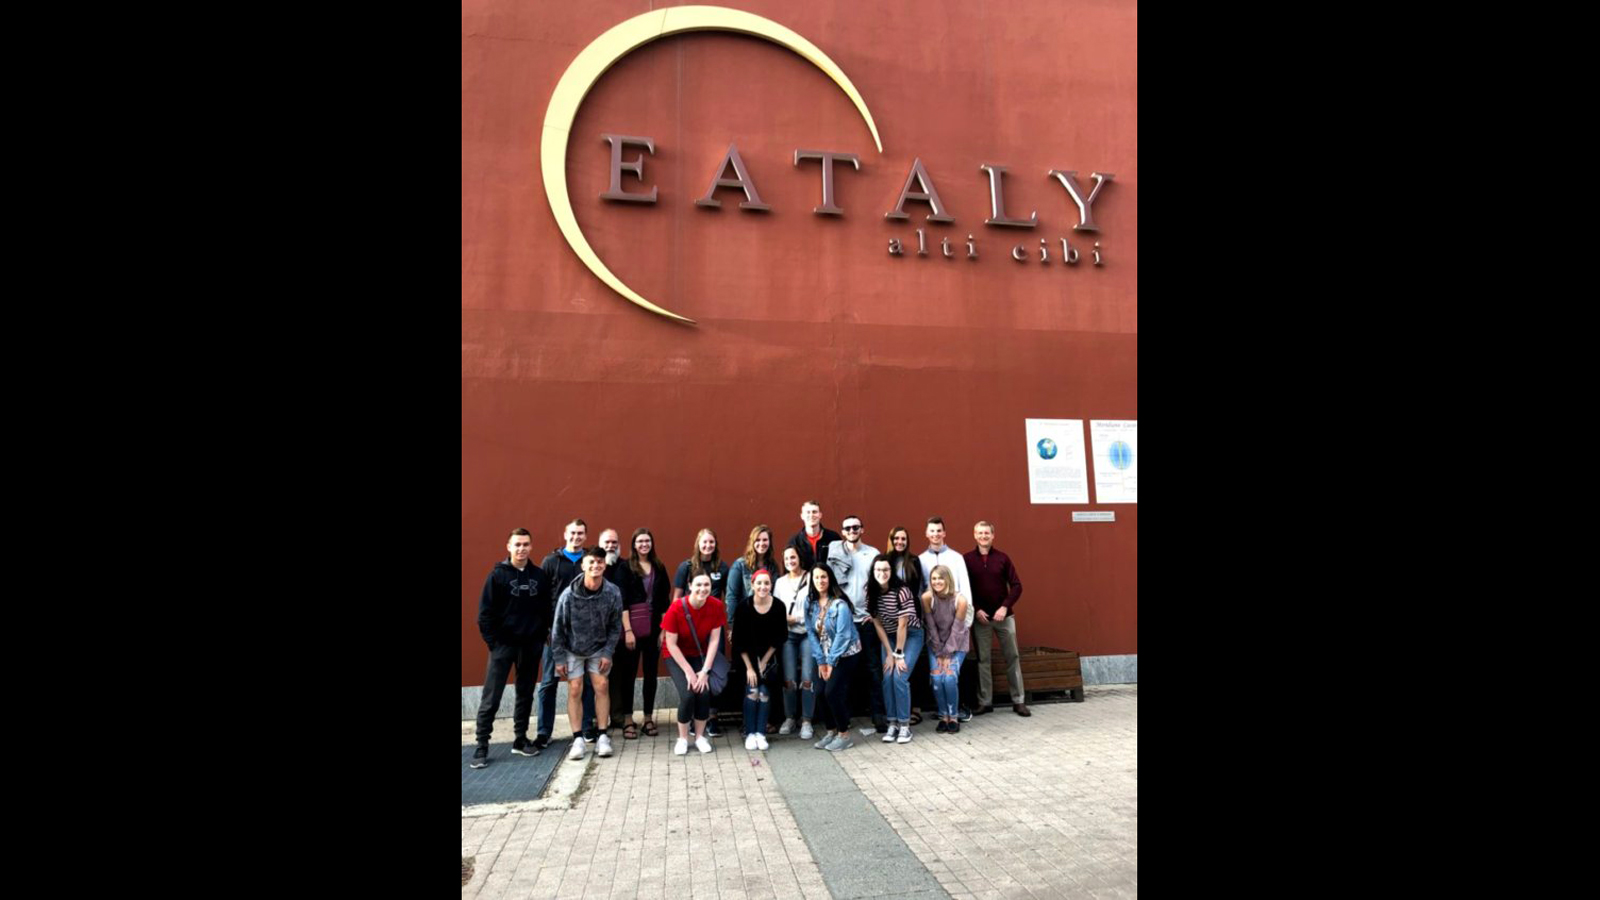 Travel study group visits the original eataly restaurant headquarters in Torino, Italy